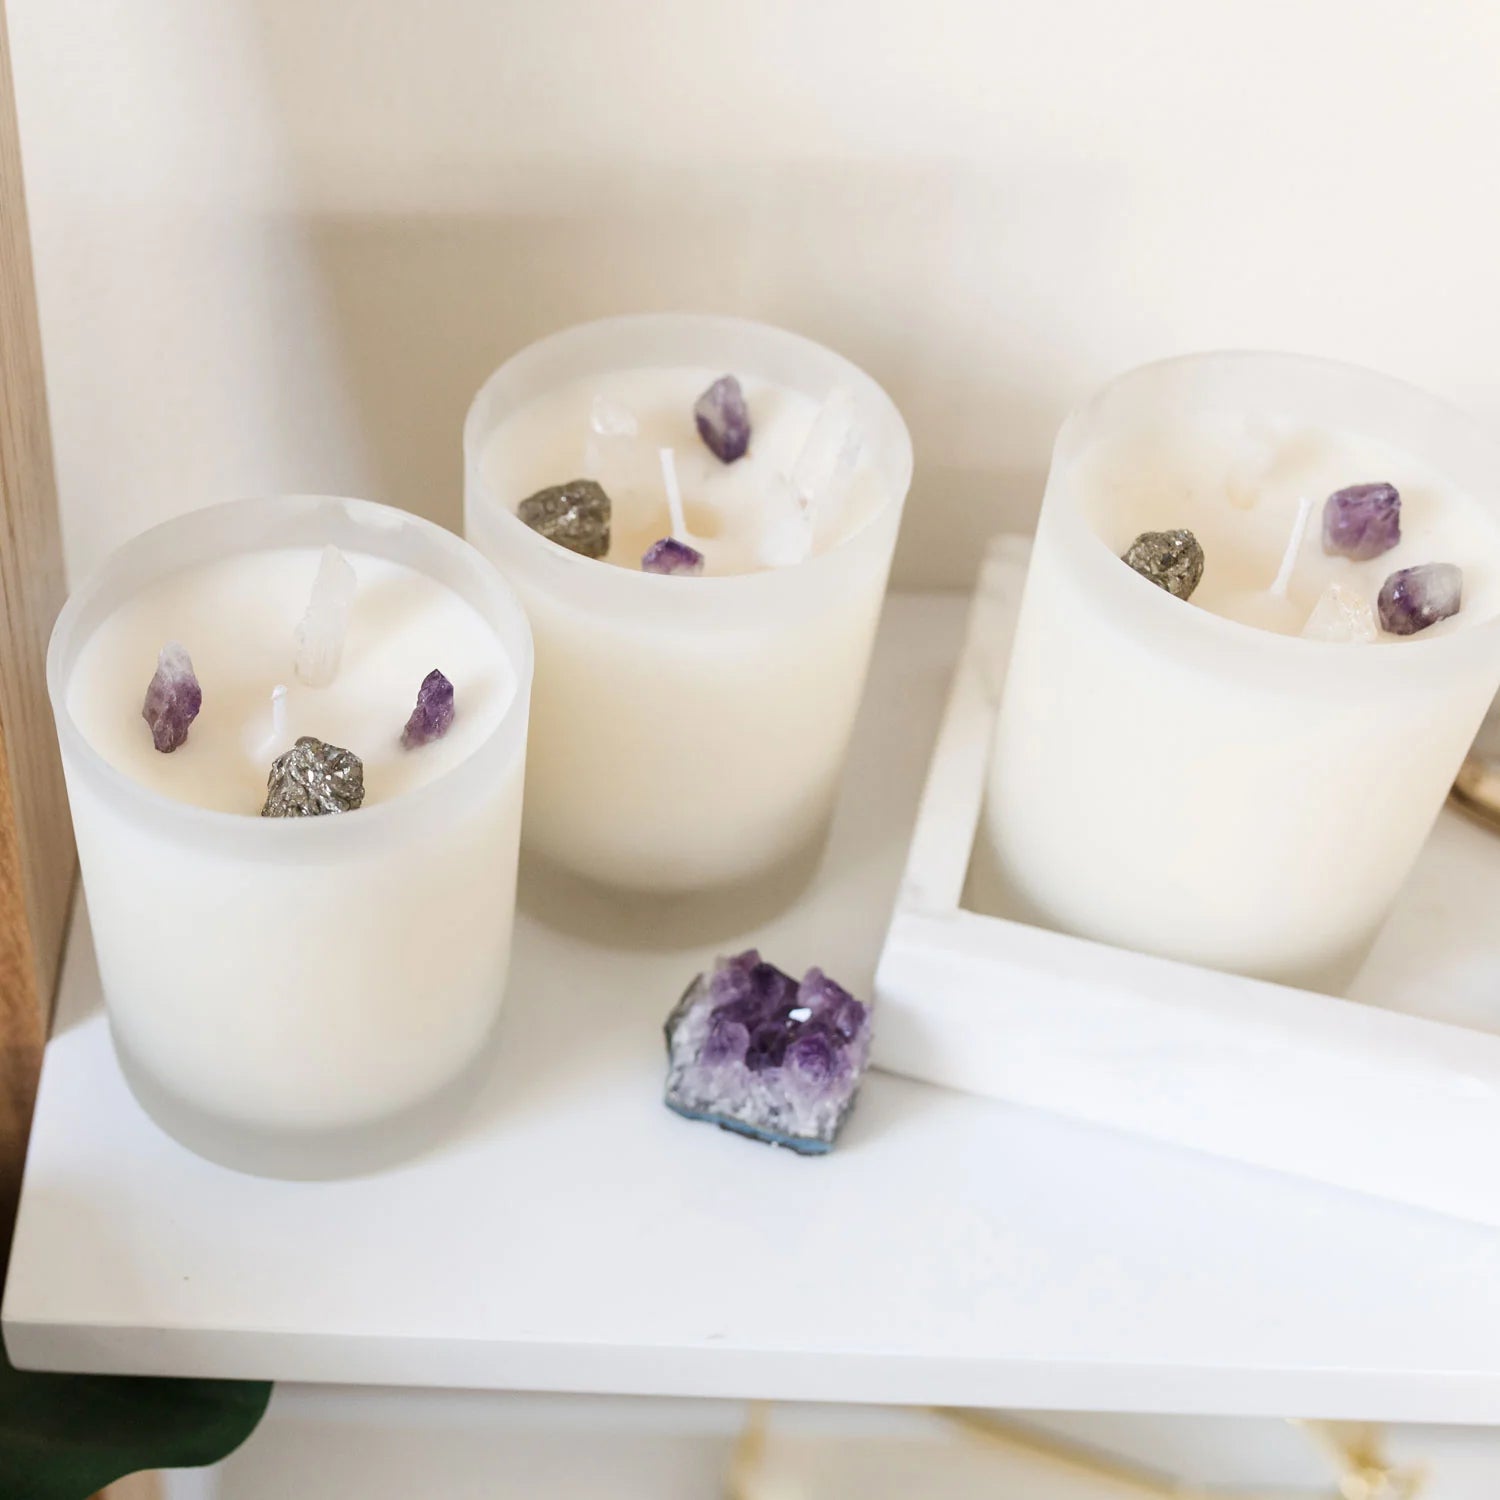 Crystal Candle